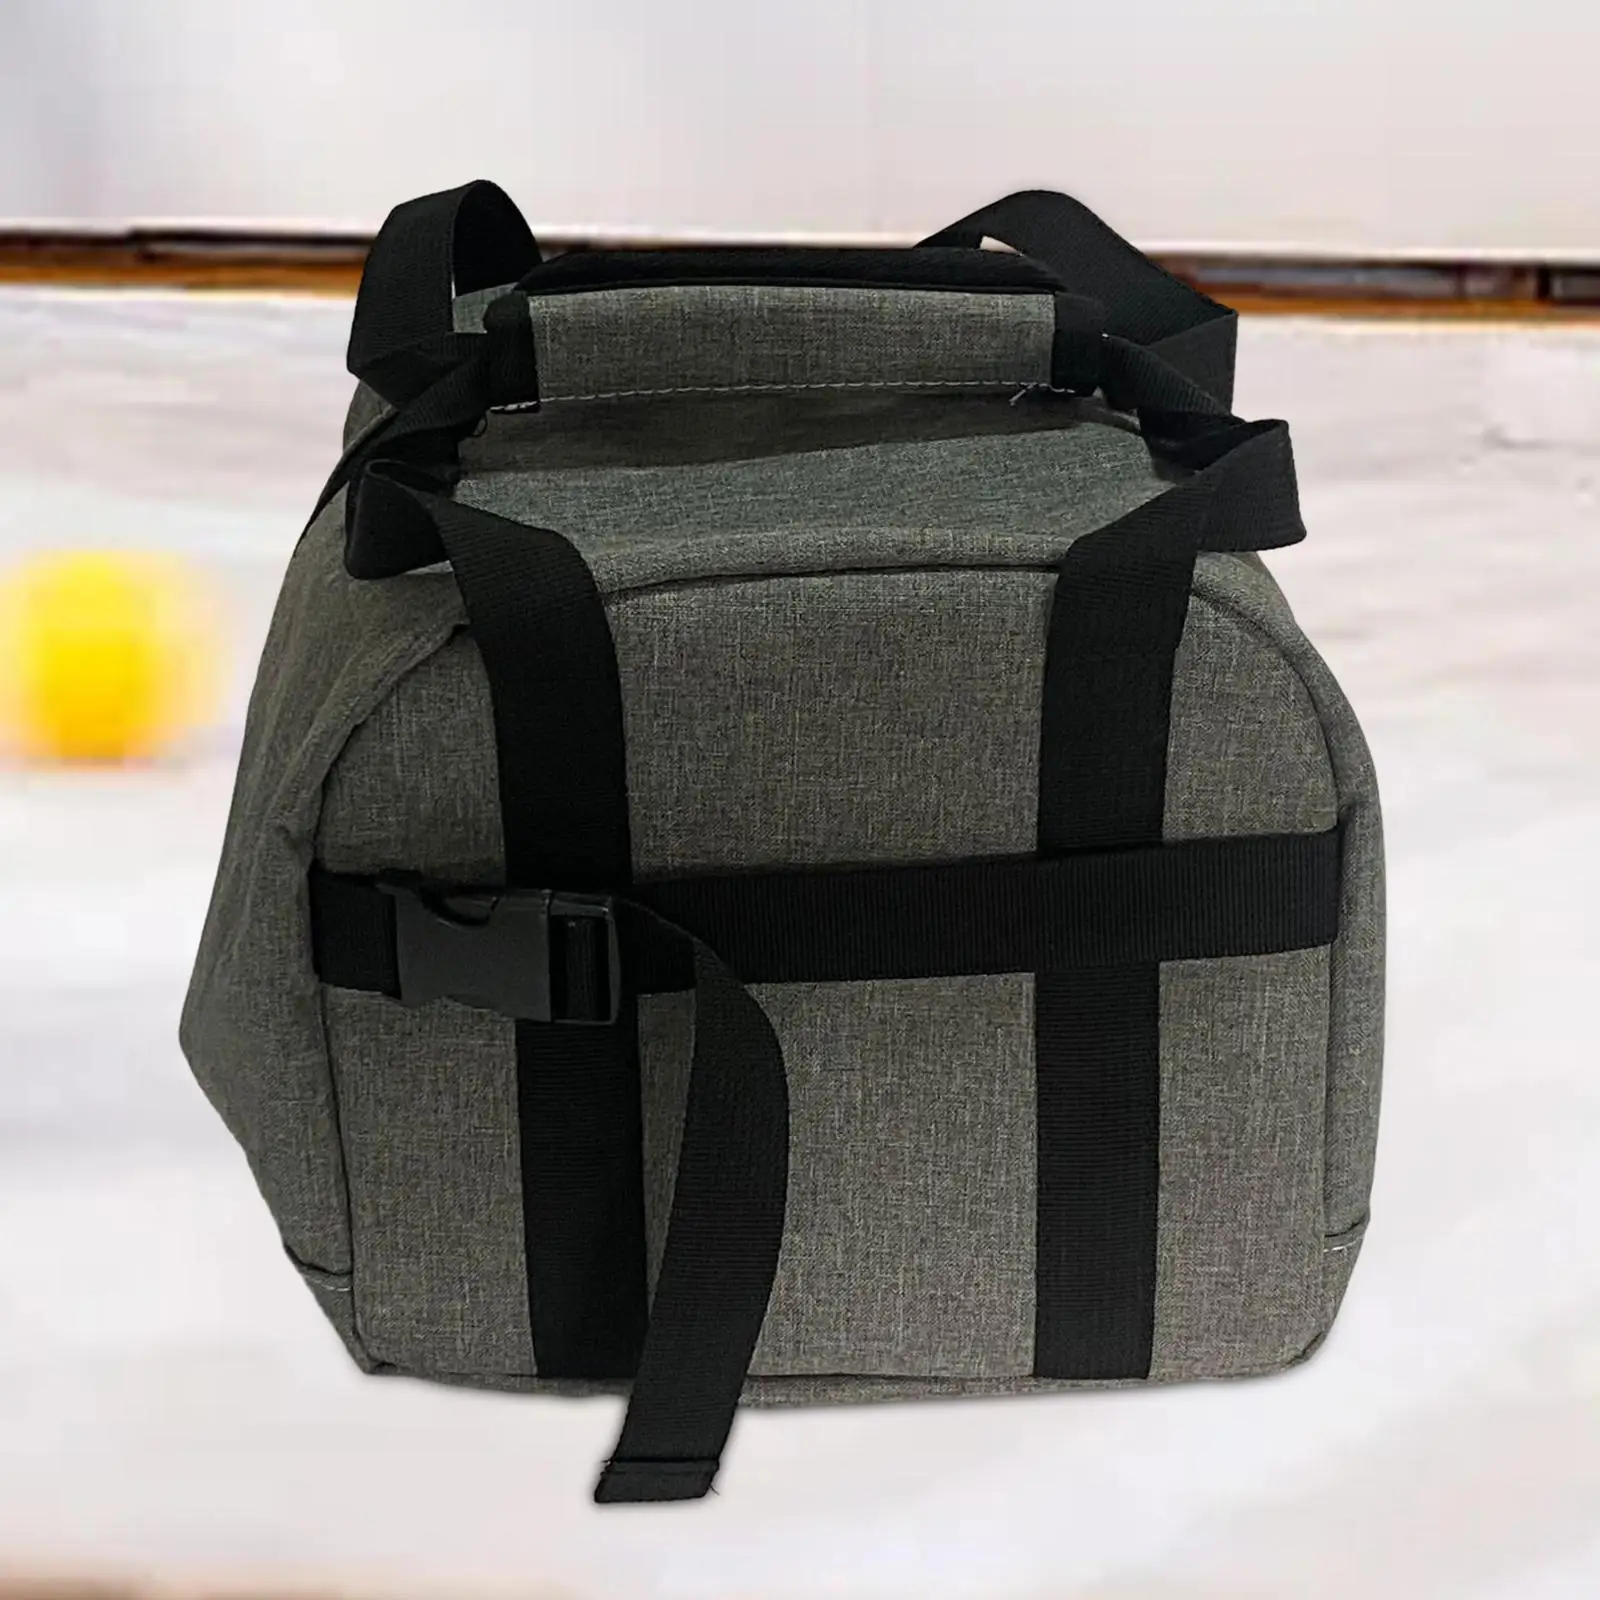 Single Bowling Ball Bag Add on for Luggage Adjustable Strap Carrying Bag Bowling Tote Bag Bowling Ball Holder for Women Men